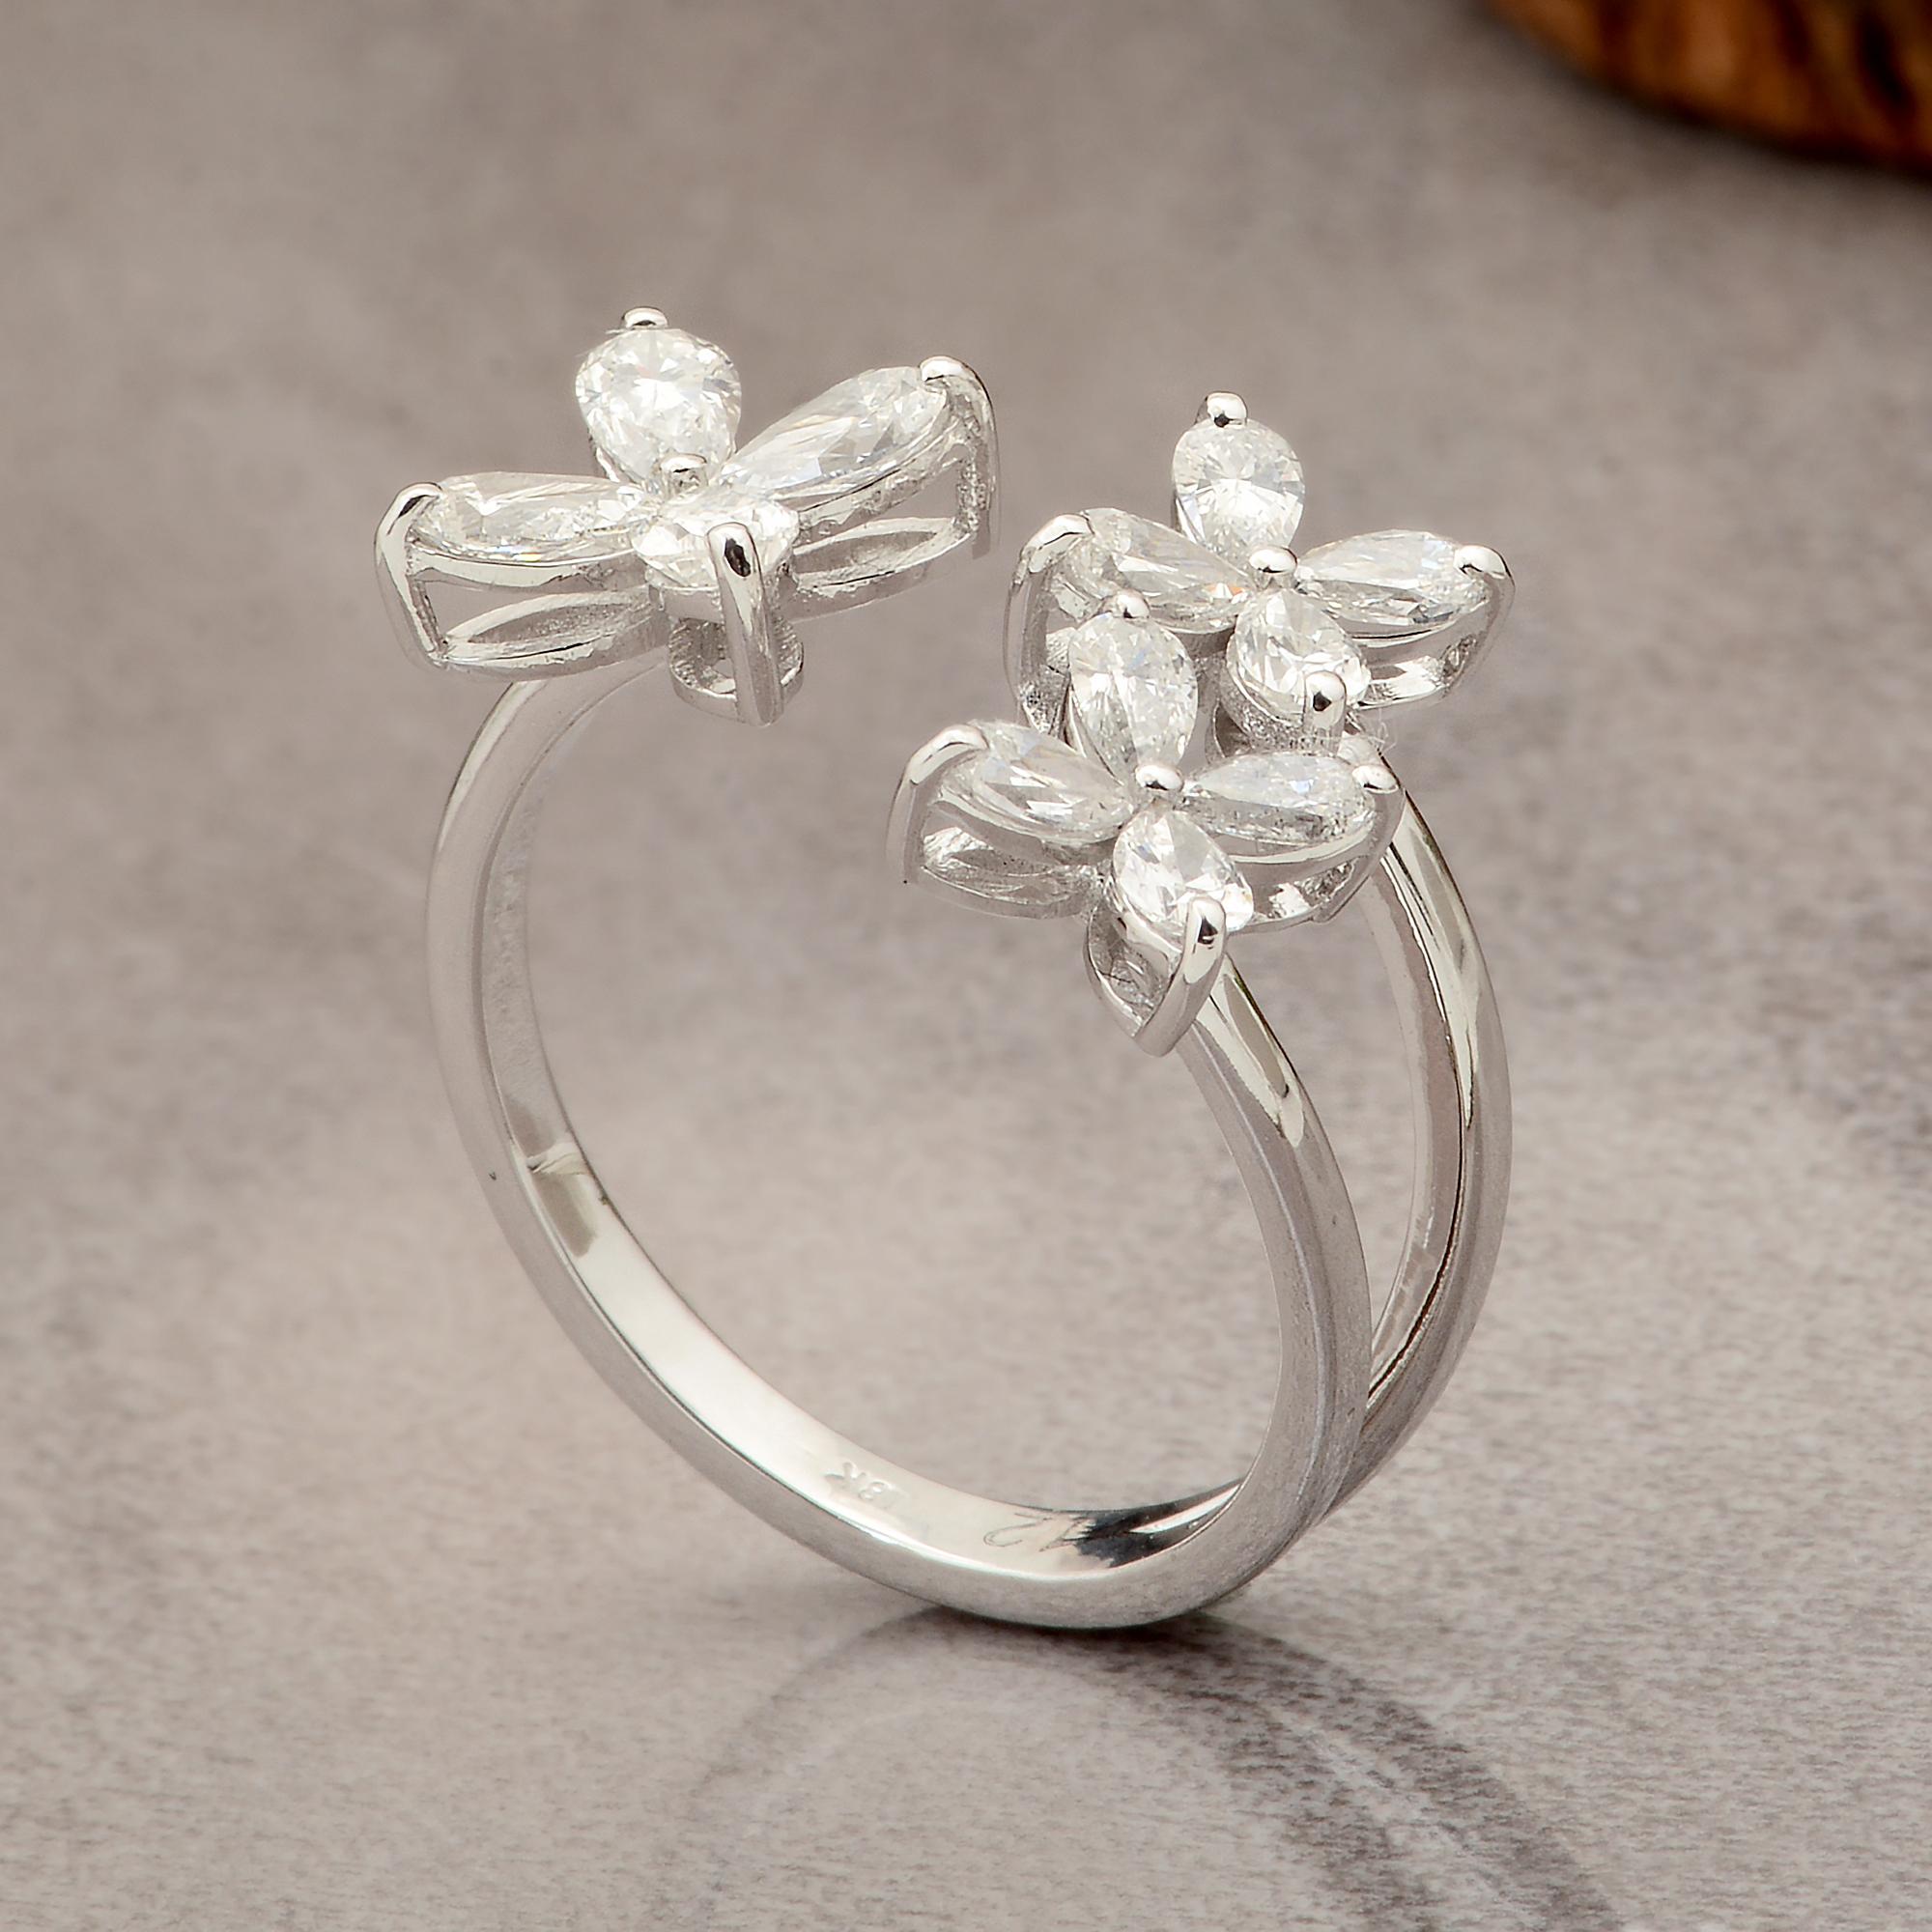 For Sale:  1.20 Carat Pear Diamond Flower Cuff Ring Solid 18k White Gold Handmade Jewelry 4